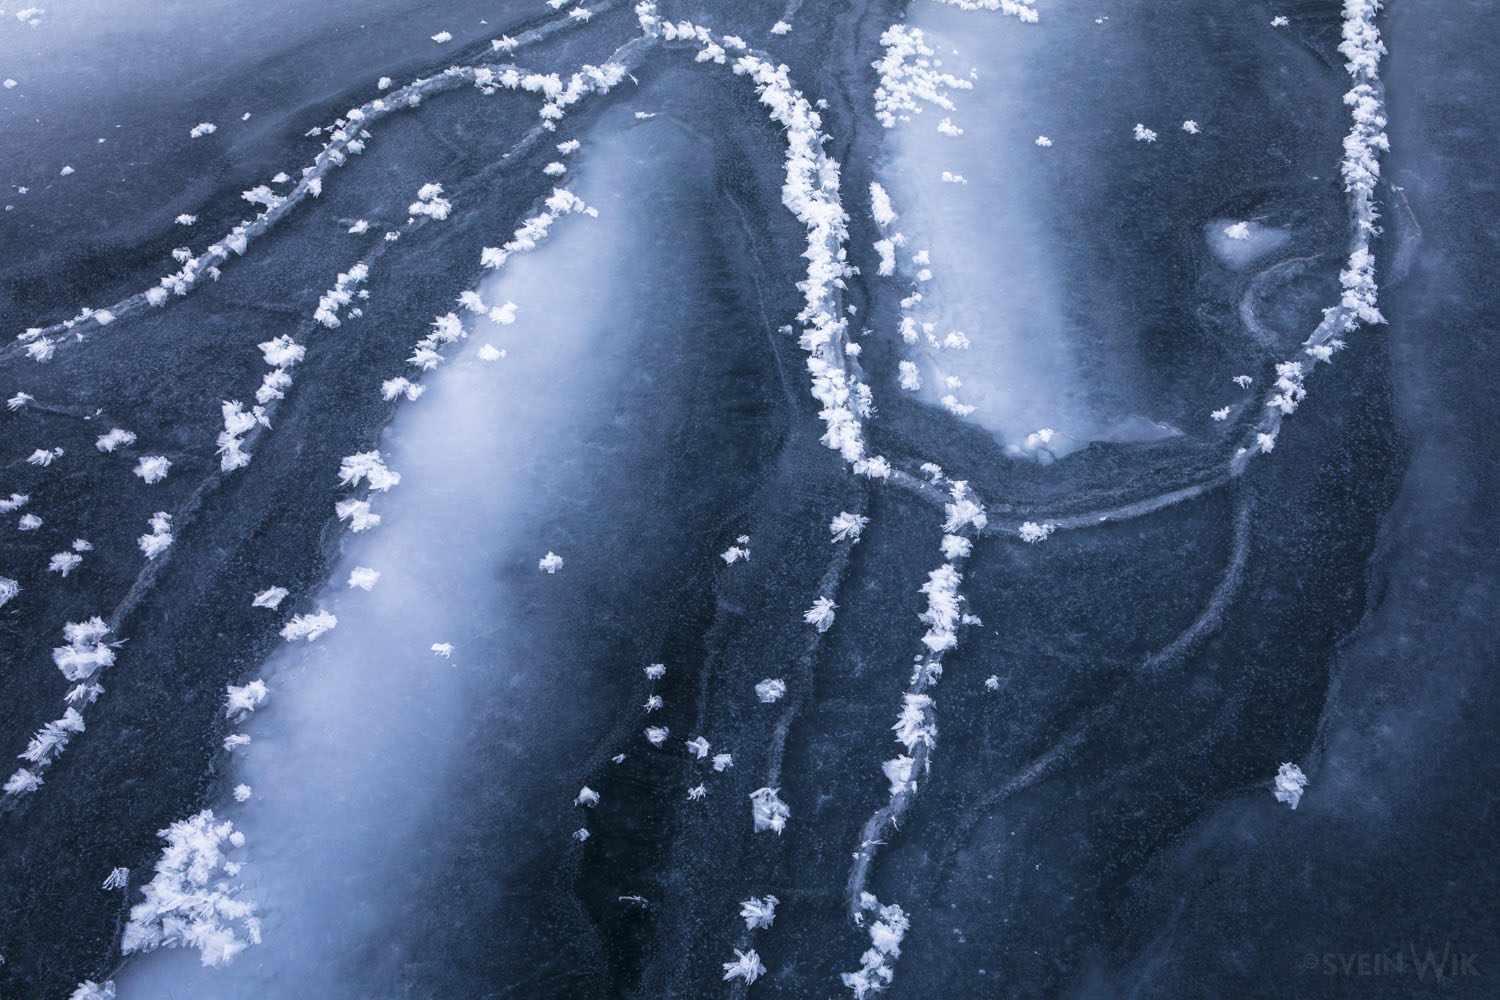 Patterns of ice in the Murchisons fjord system